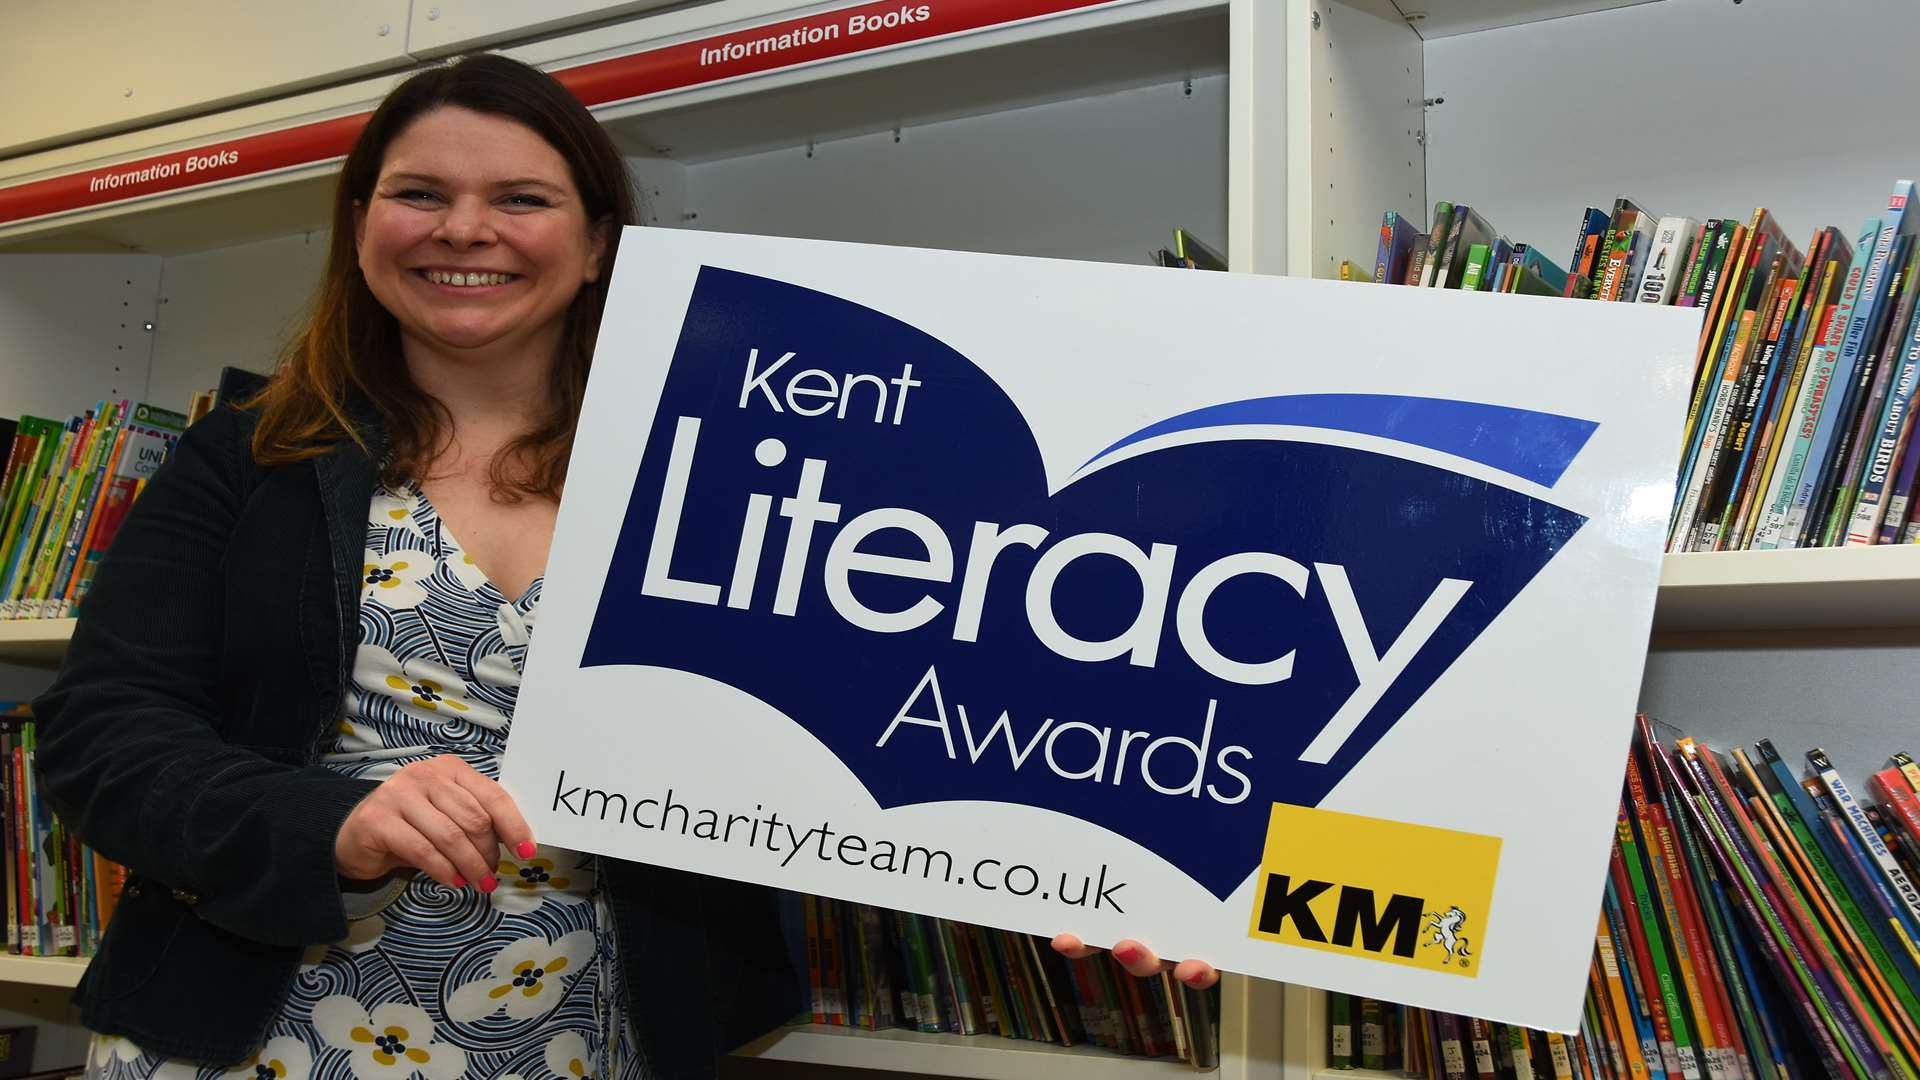 Rebecca Smith of Social Enterprise Kent (SEK) shows her support for the Kent Literacy Awards which are still open for nominations until April 29.